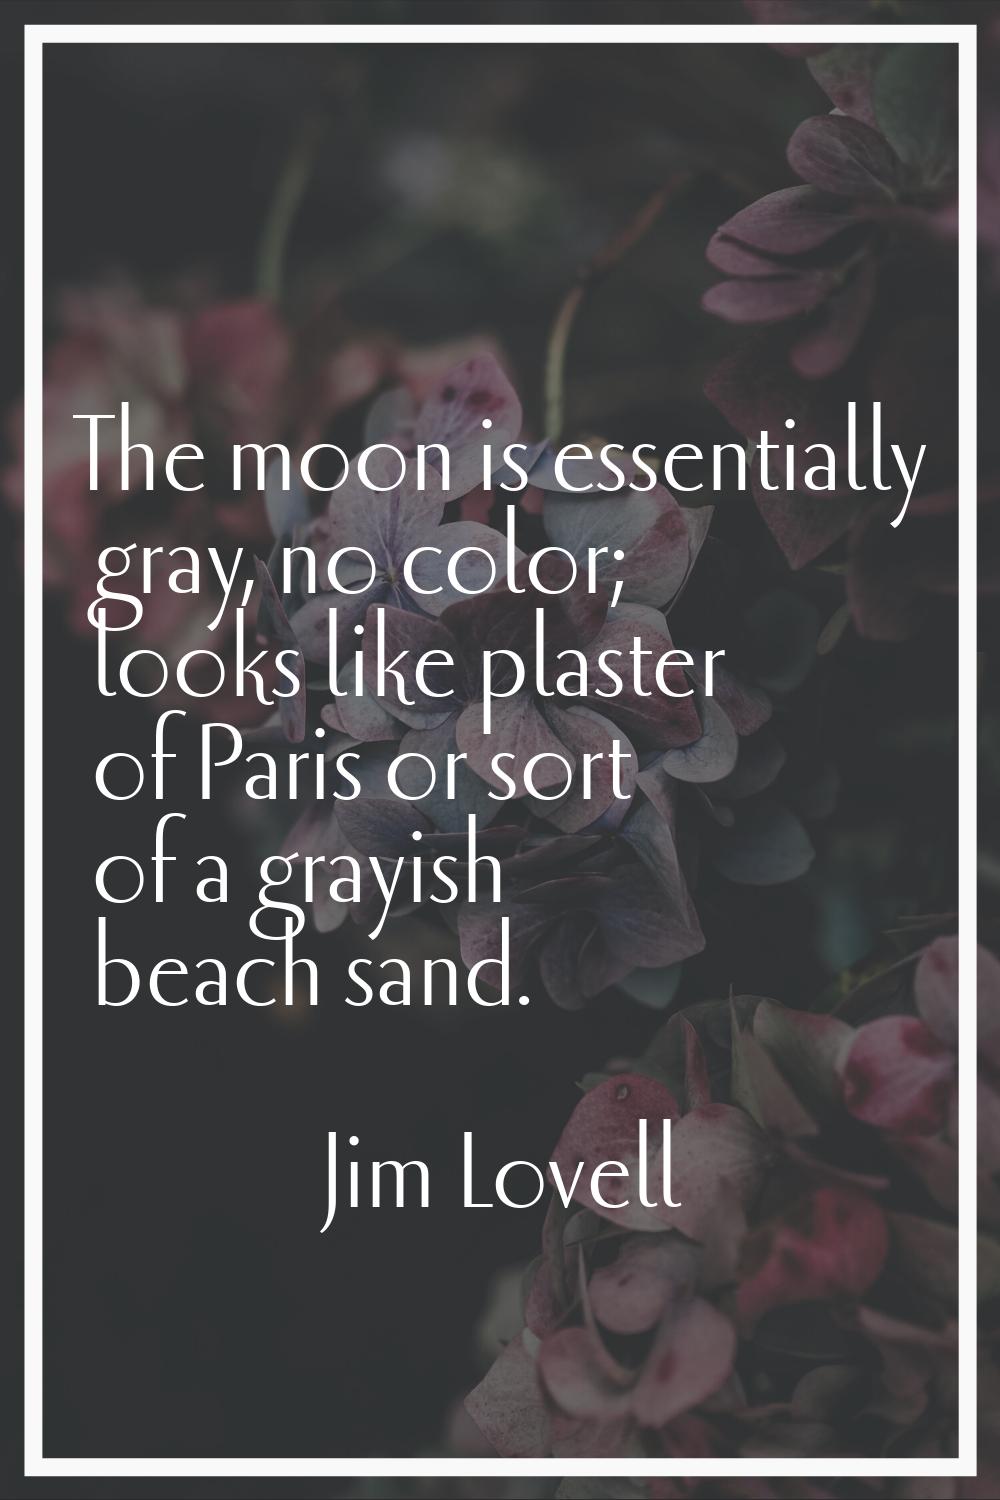 The moon is essentially gray, no color; looks like plaster of Paris or sort of a grayish beach sand